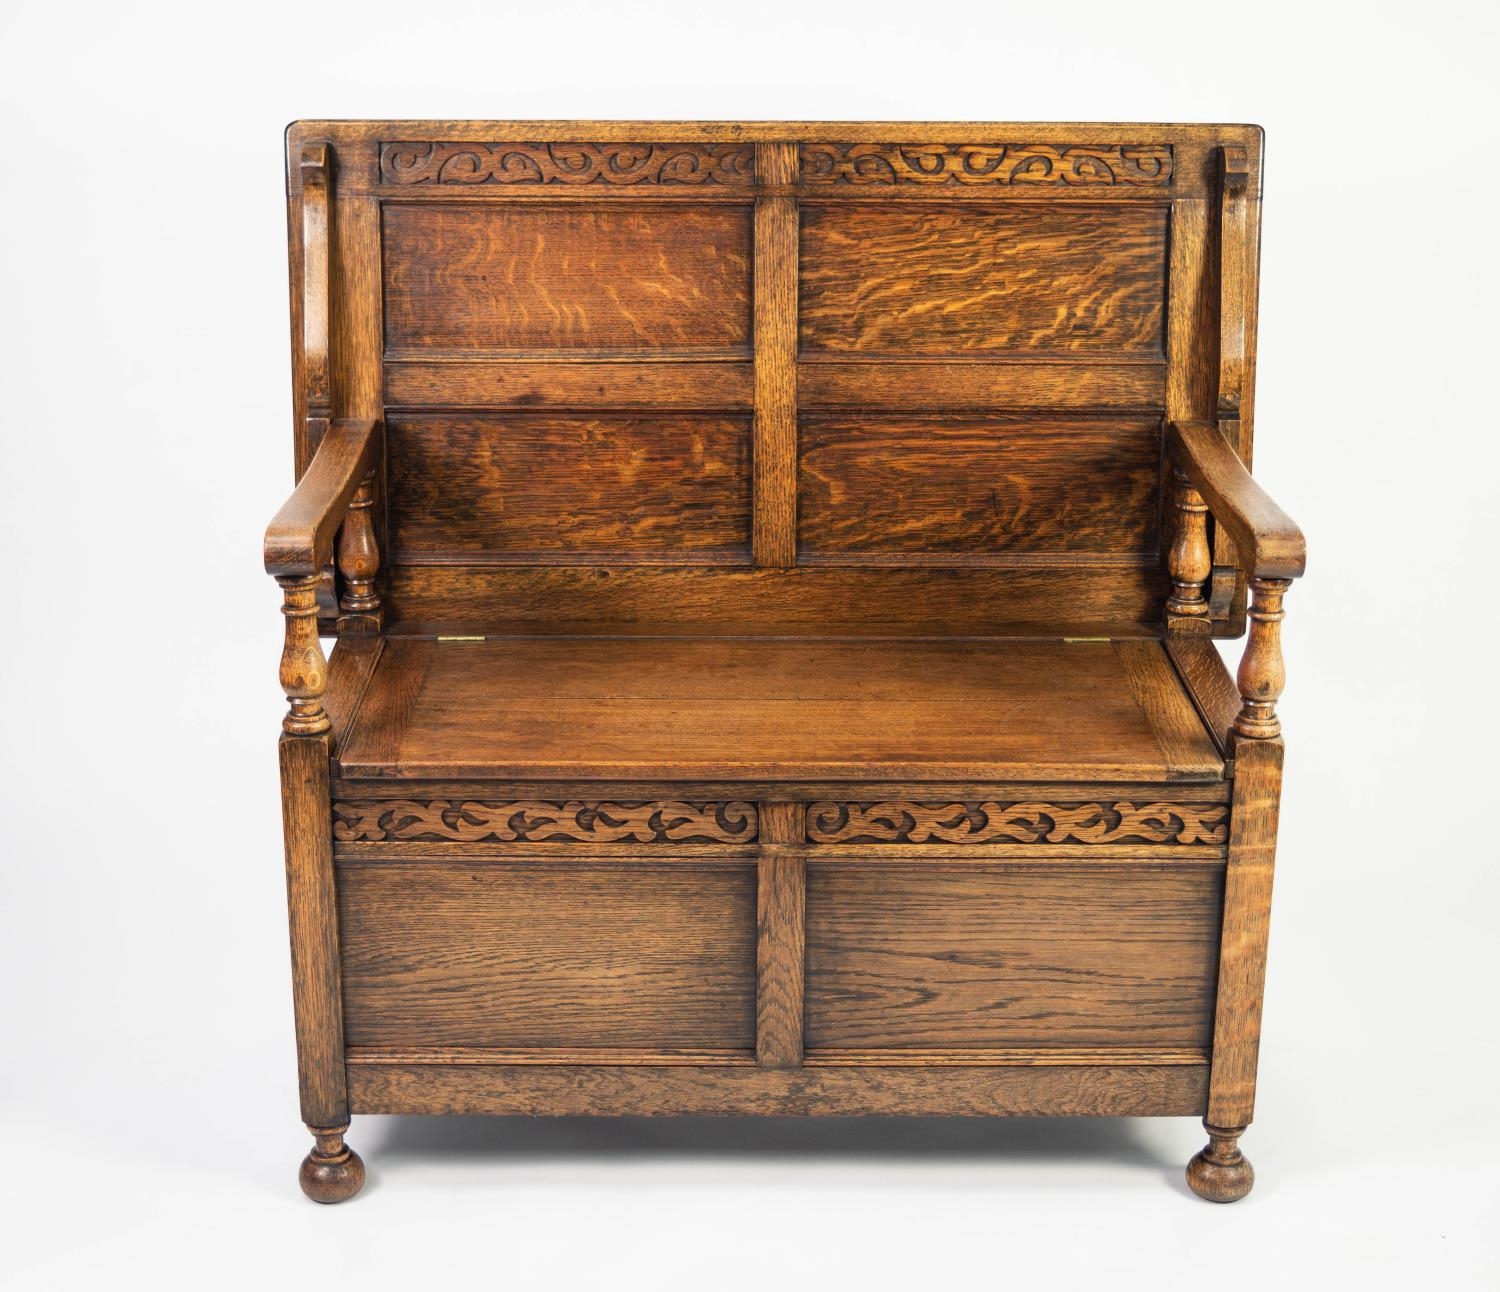 TWENTIETH CENTURY CARVED OAK MONK?S BENCH, of typical form with baluster supports to the flat